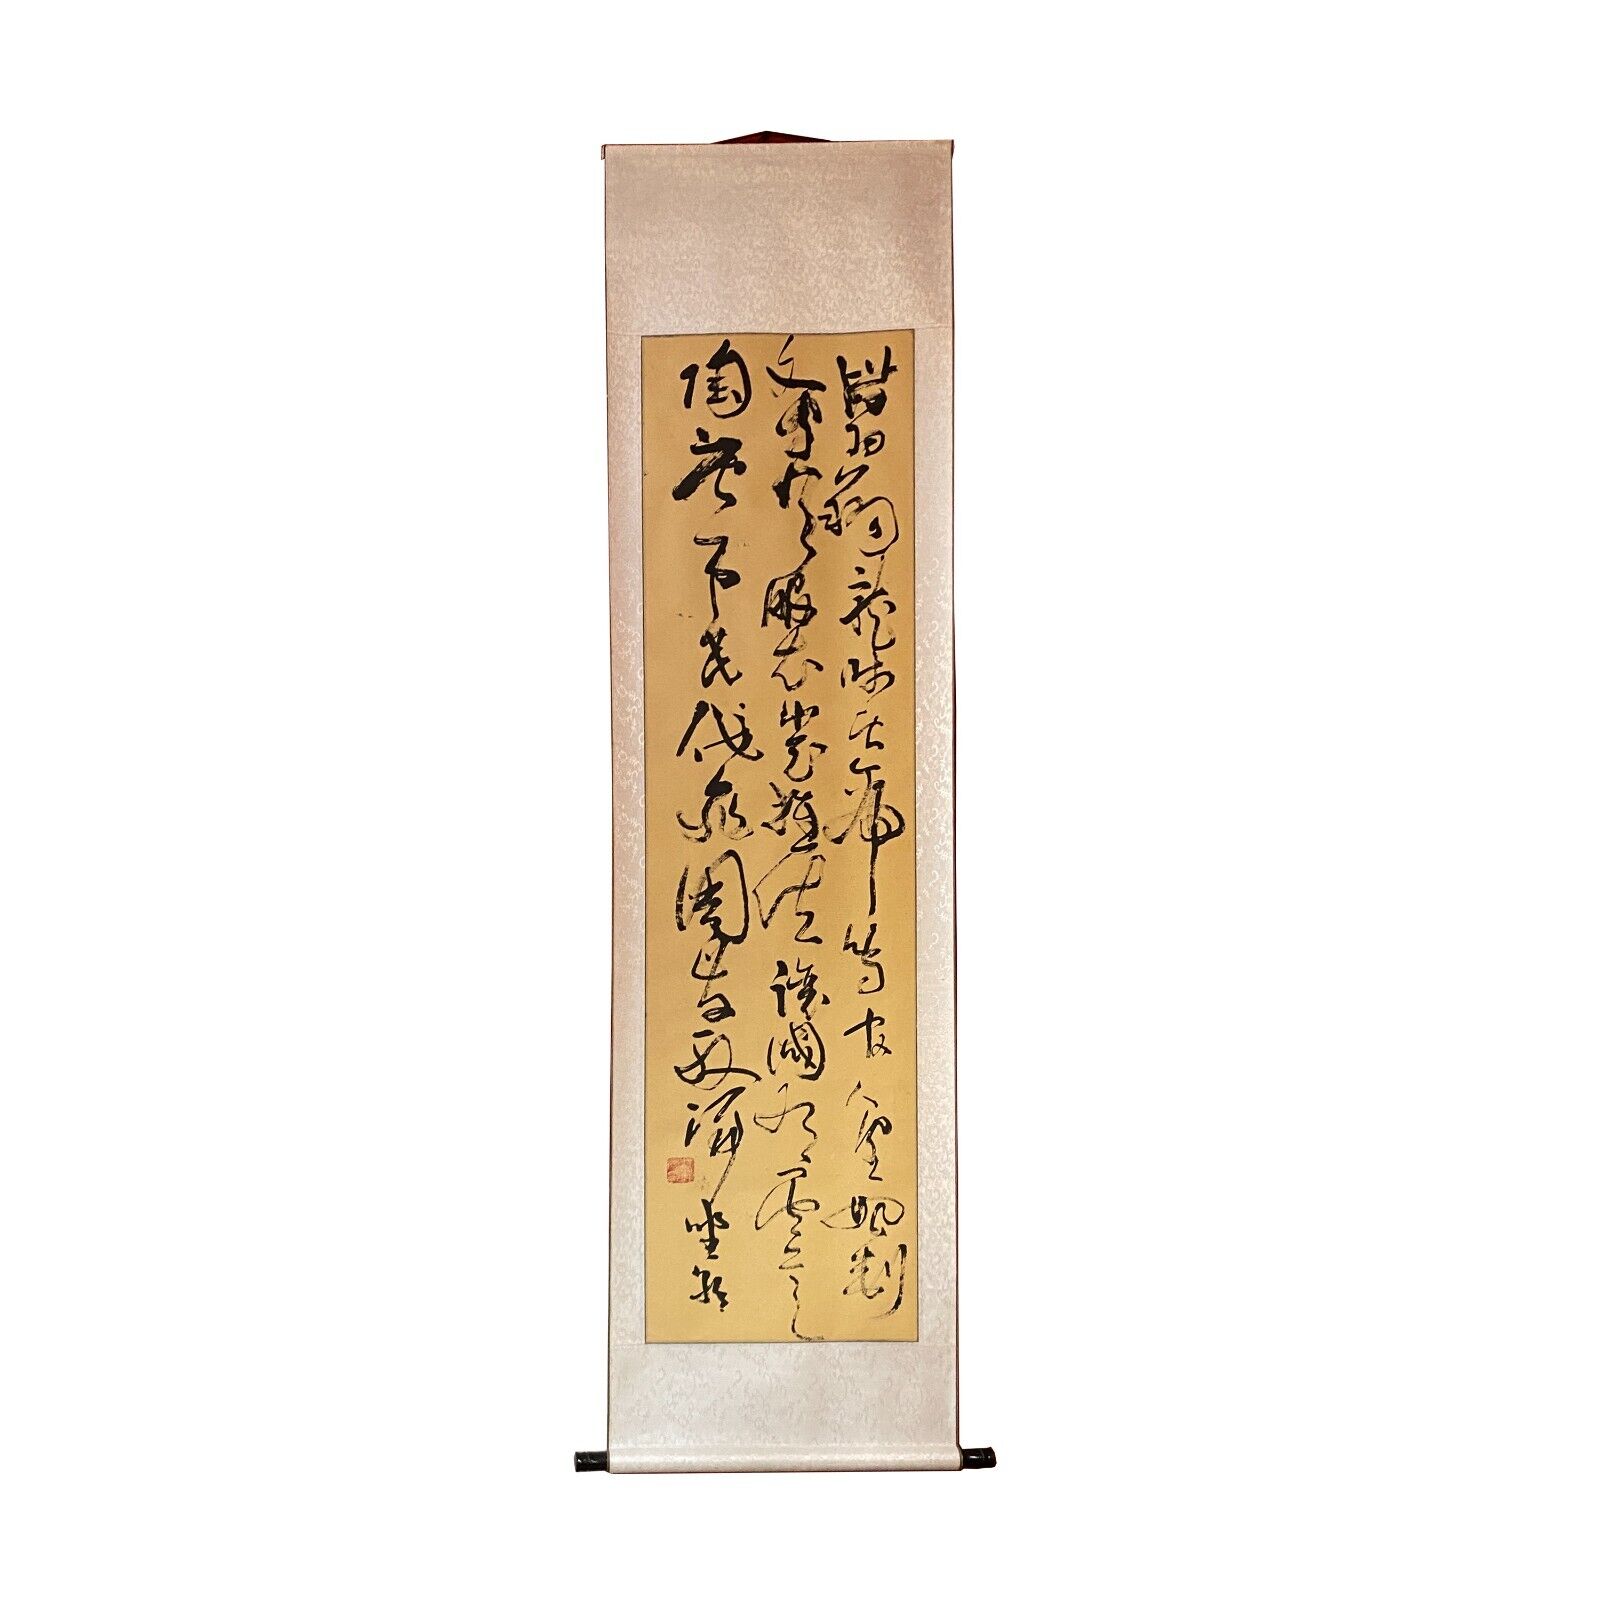 Chinese Calligraphy Ink Writing Scroll Painting Wall Art ws2144